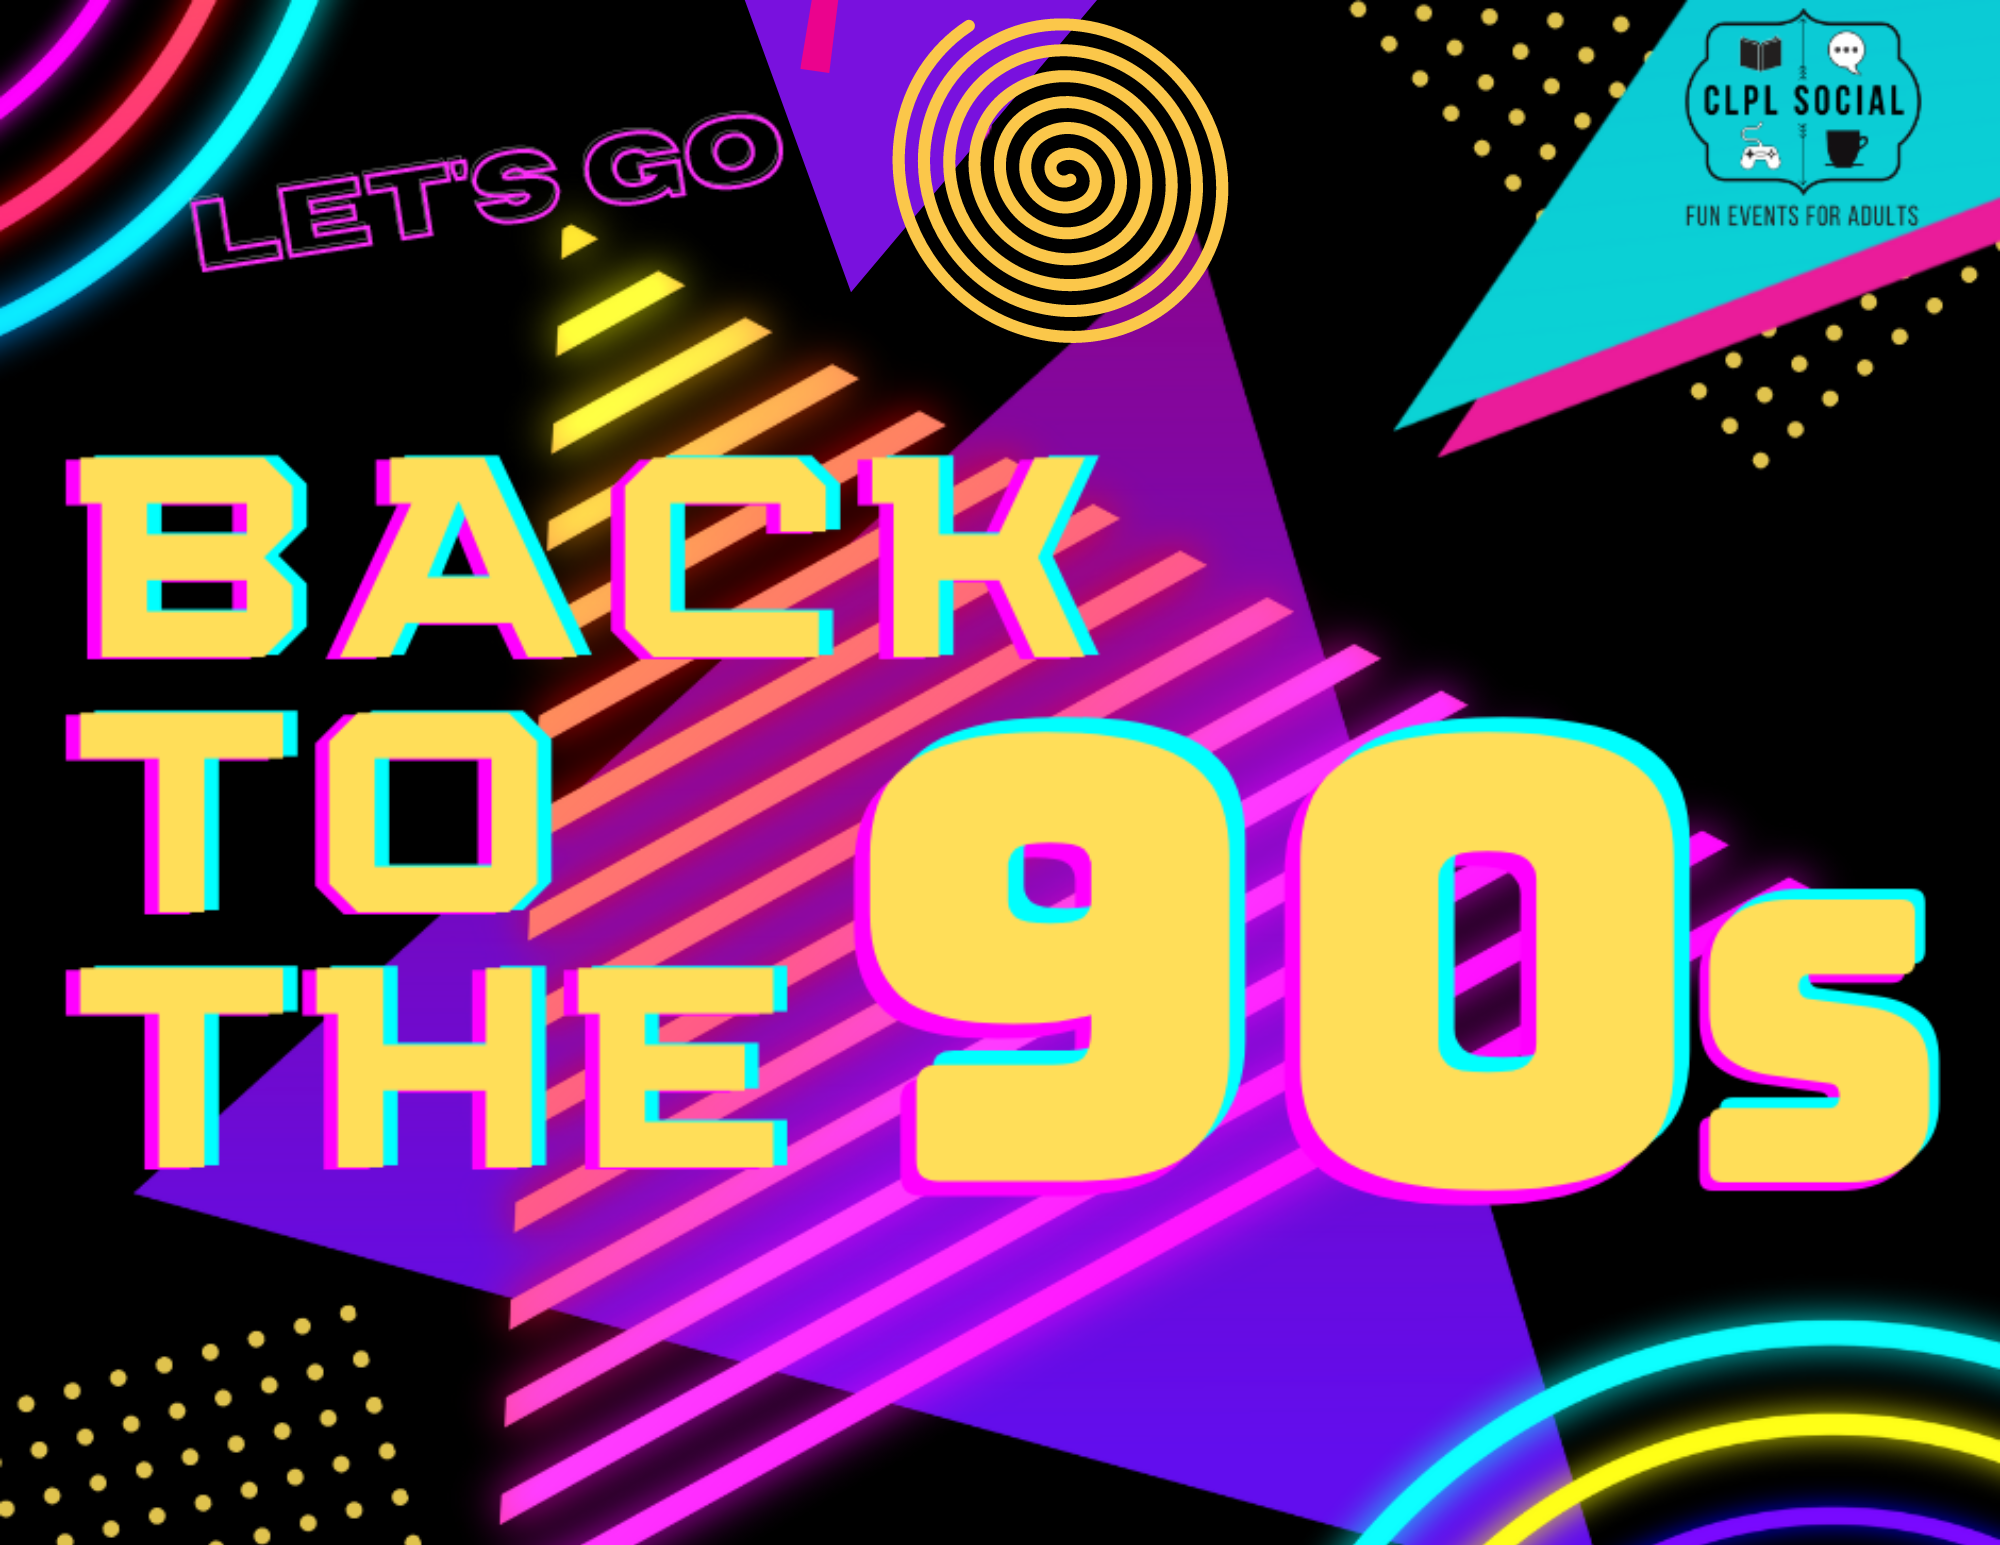 Back to the 90s logo